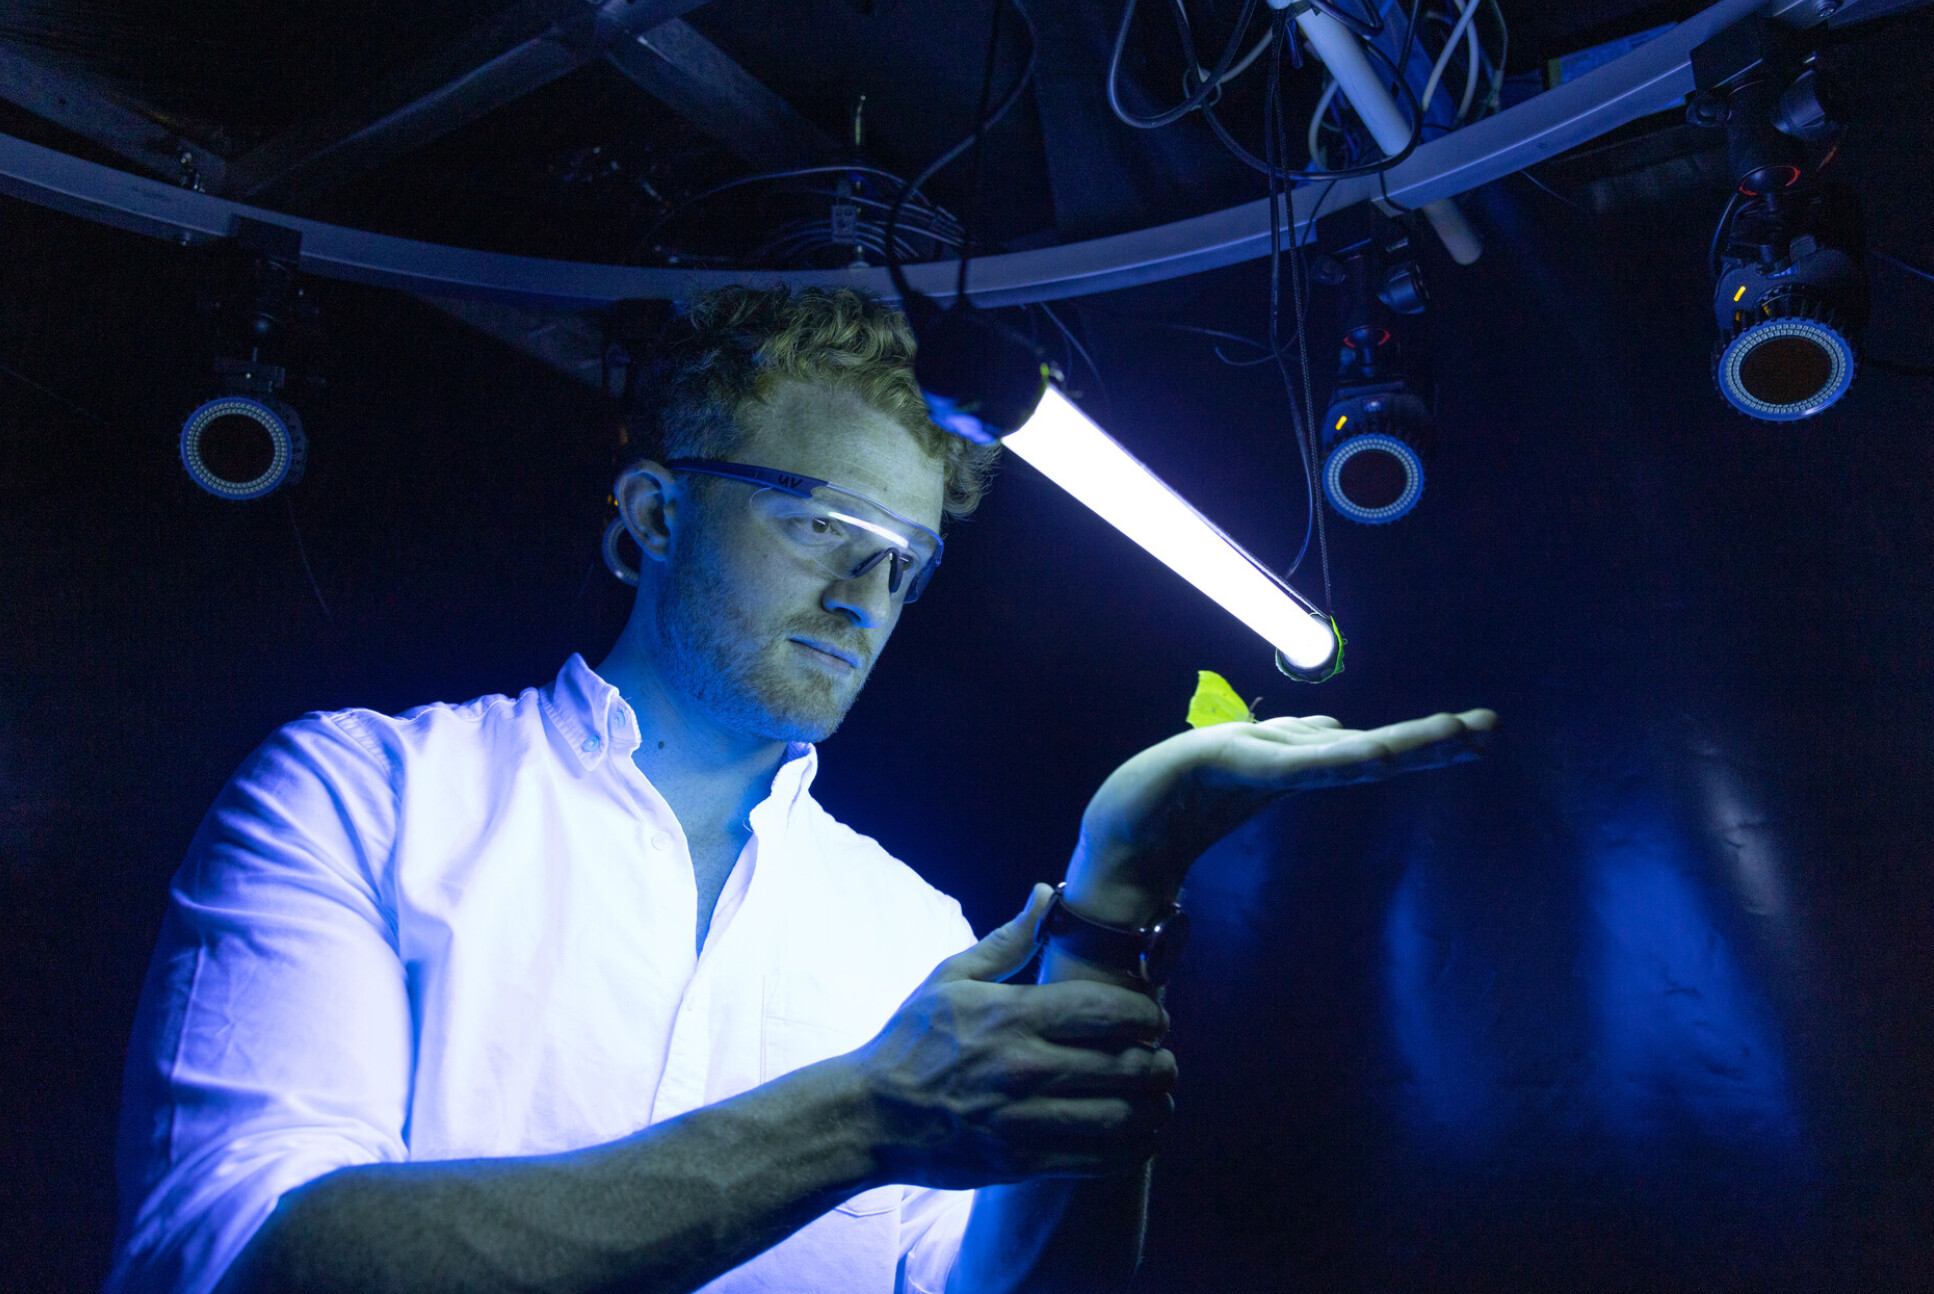 A scientist holds an insect under a light